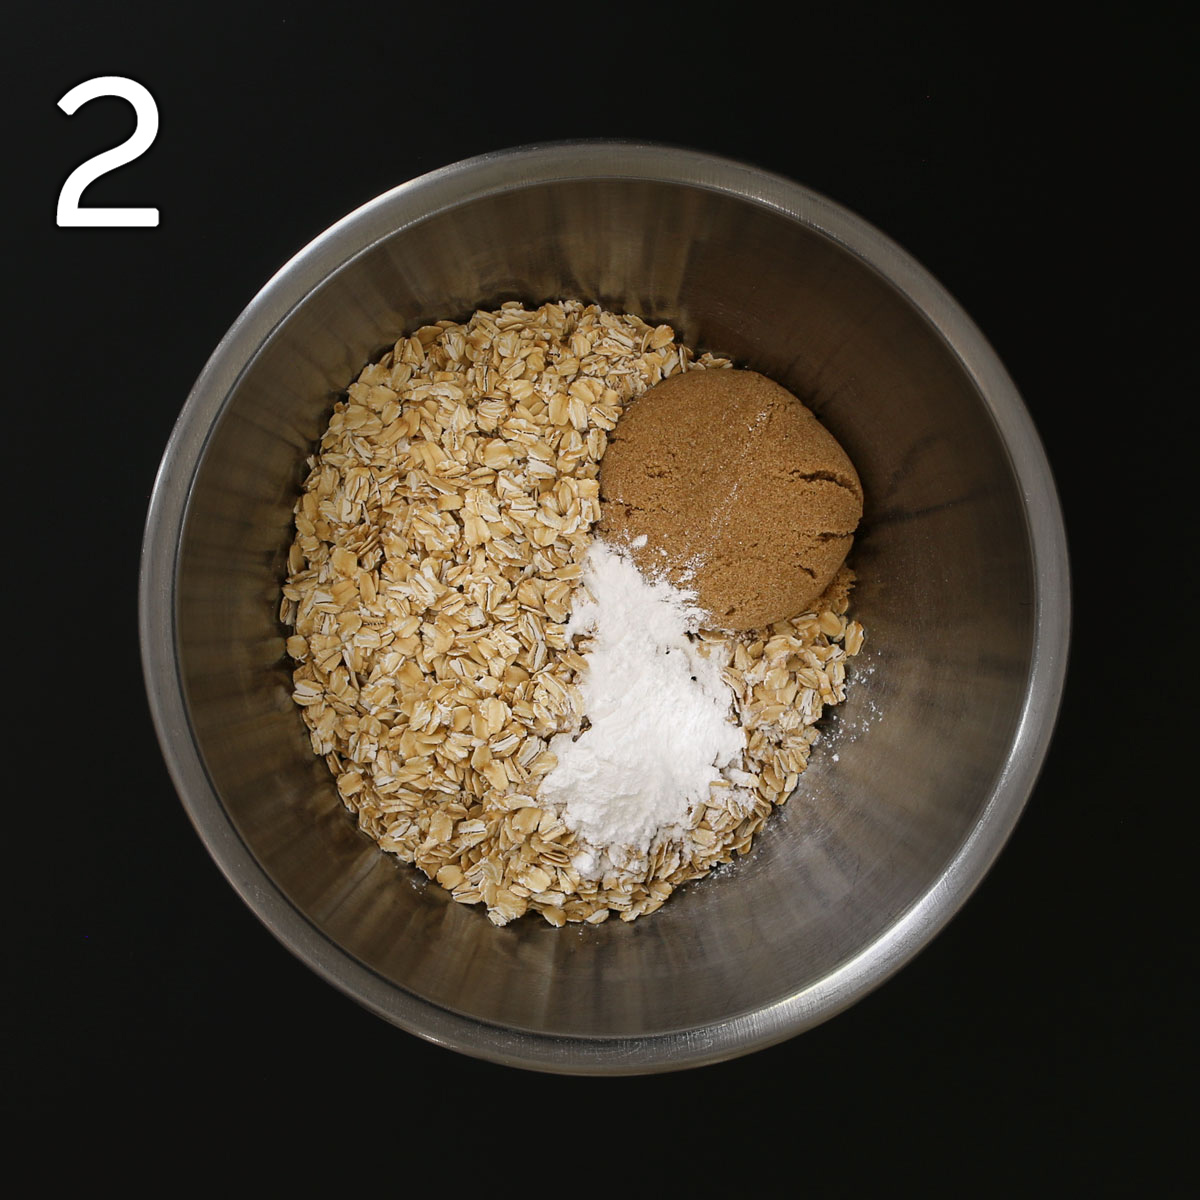 oats, leaveners, and brown sugar in large metal mixing bowl on black table top.